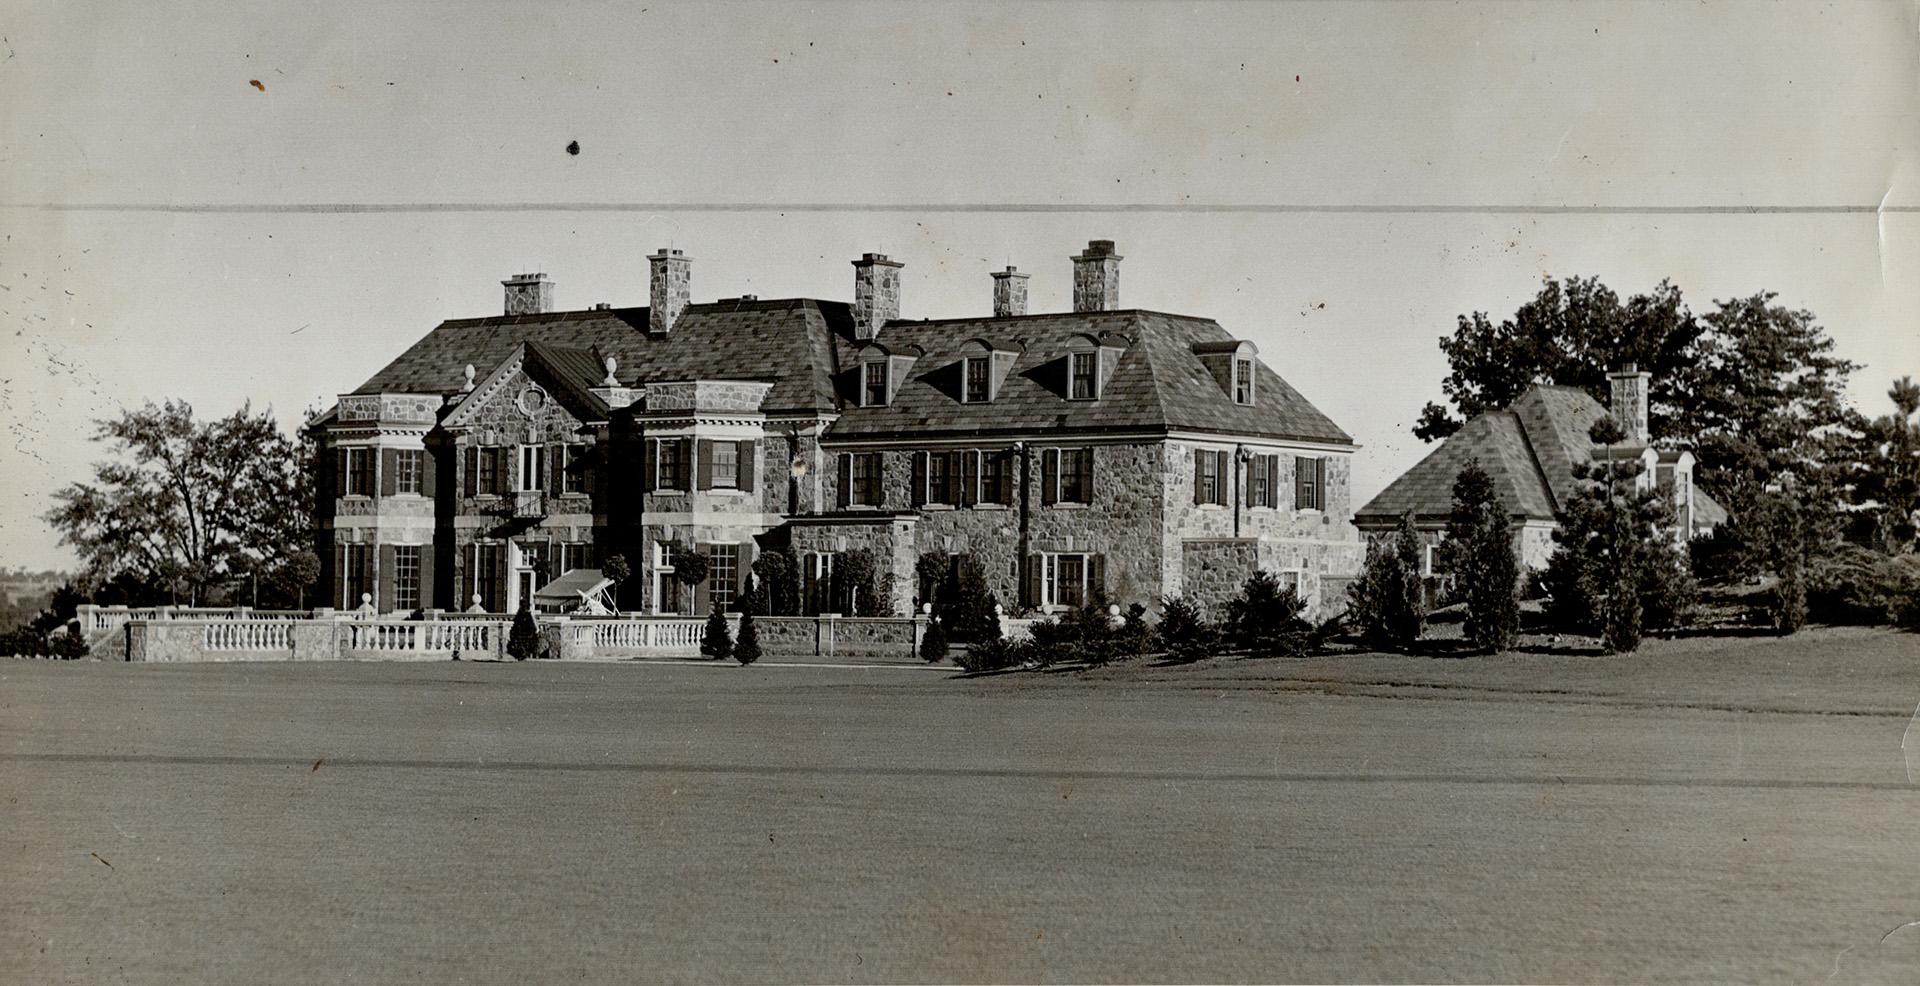 The H.R. Bain residence at Oriole, Ont